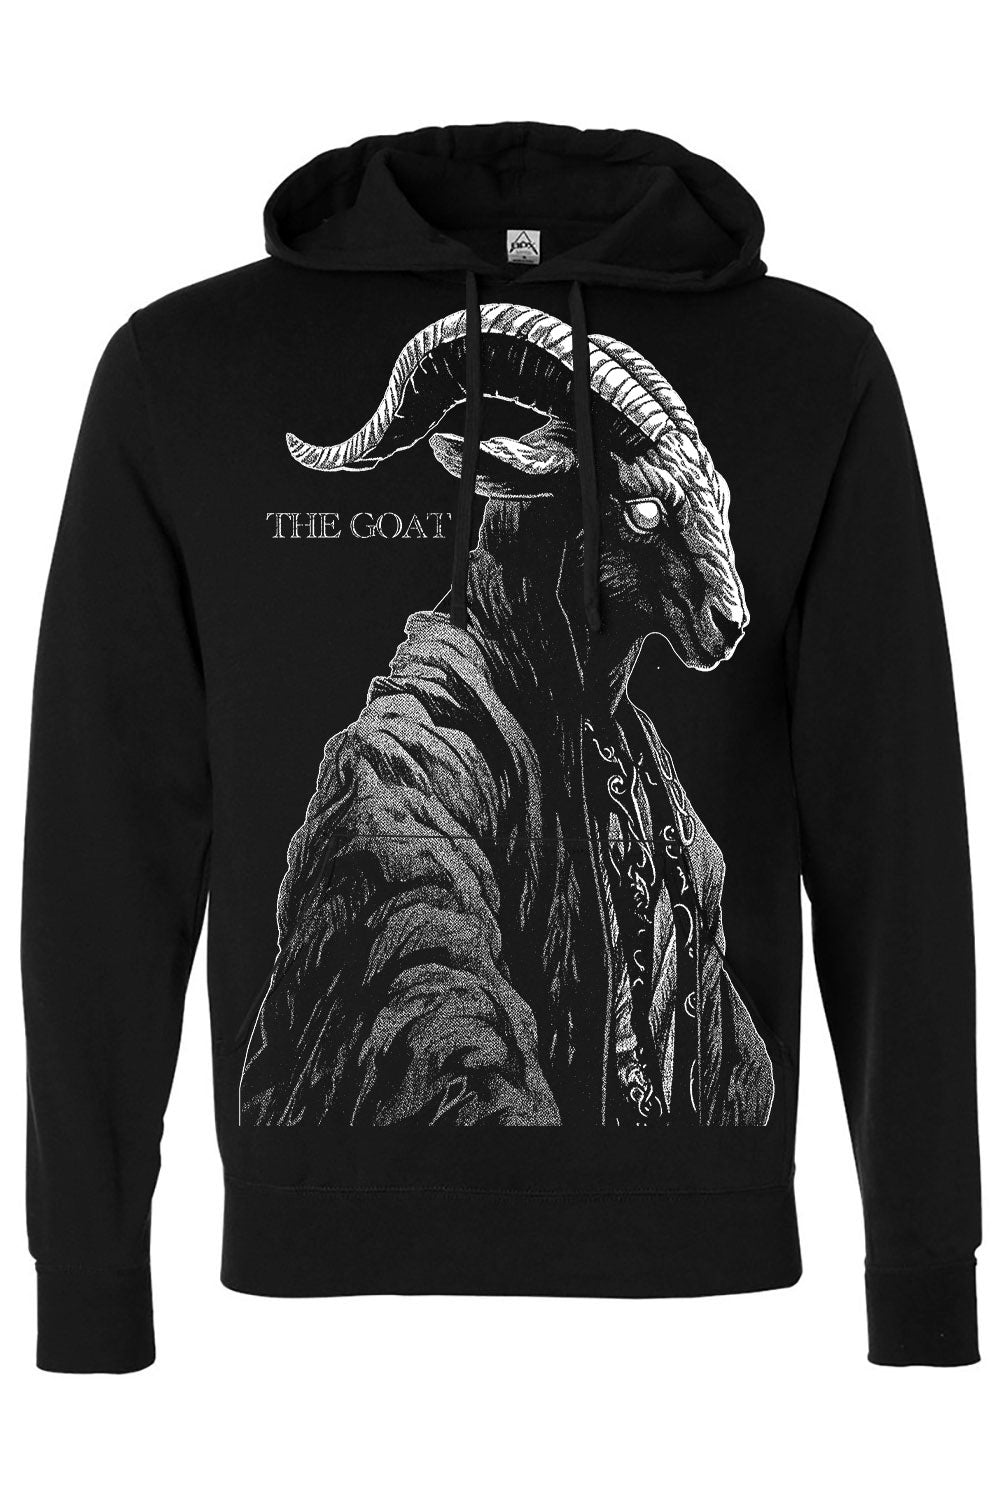 occult hoodie for men